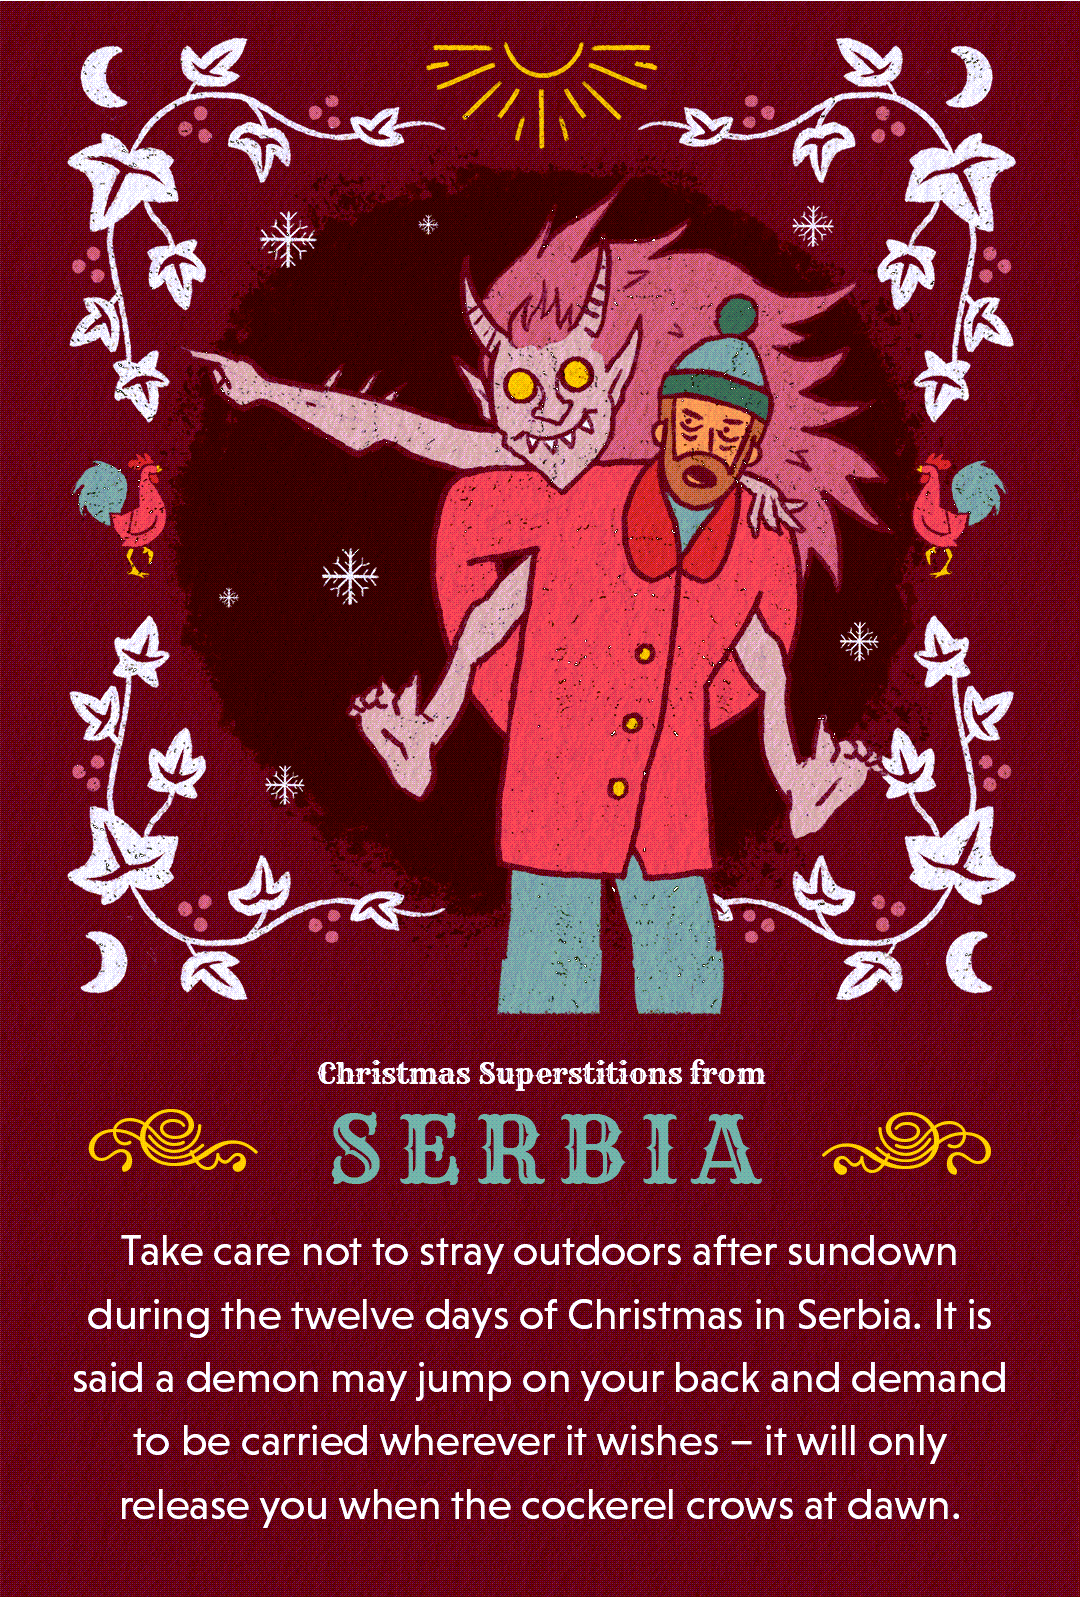 Unusual Christmas folklore from Serbia